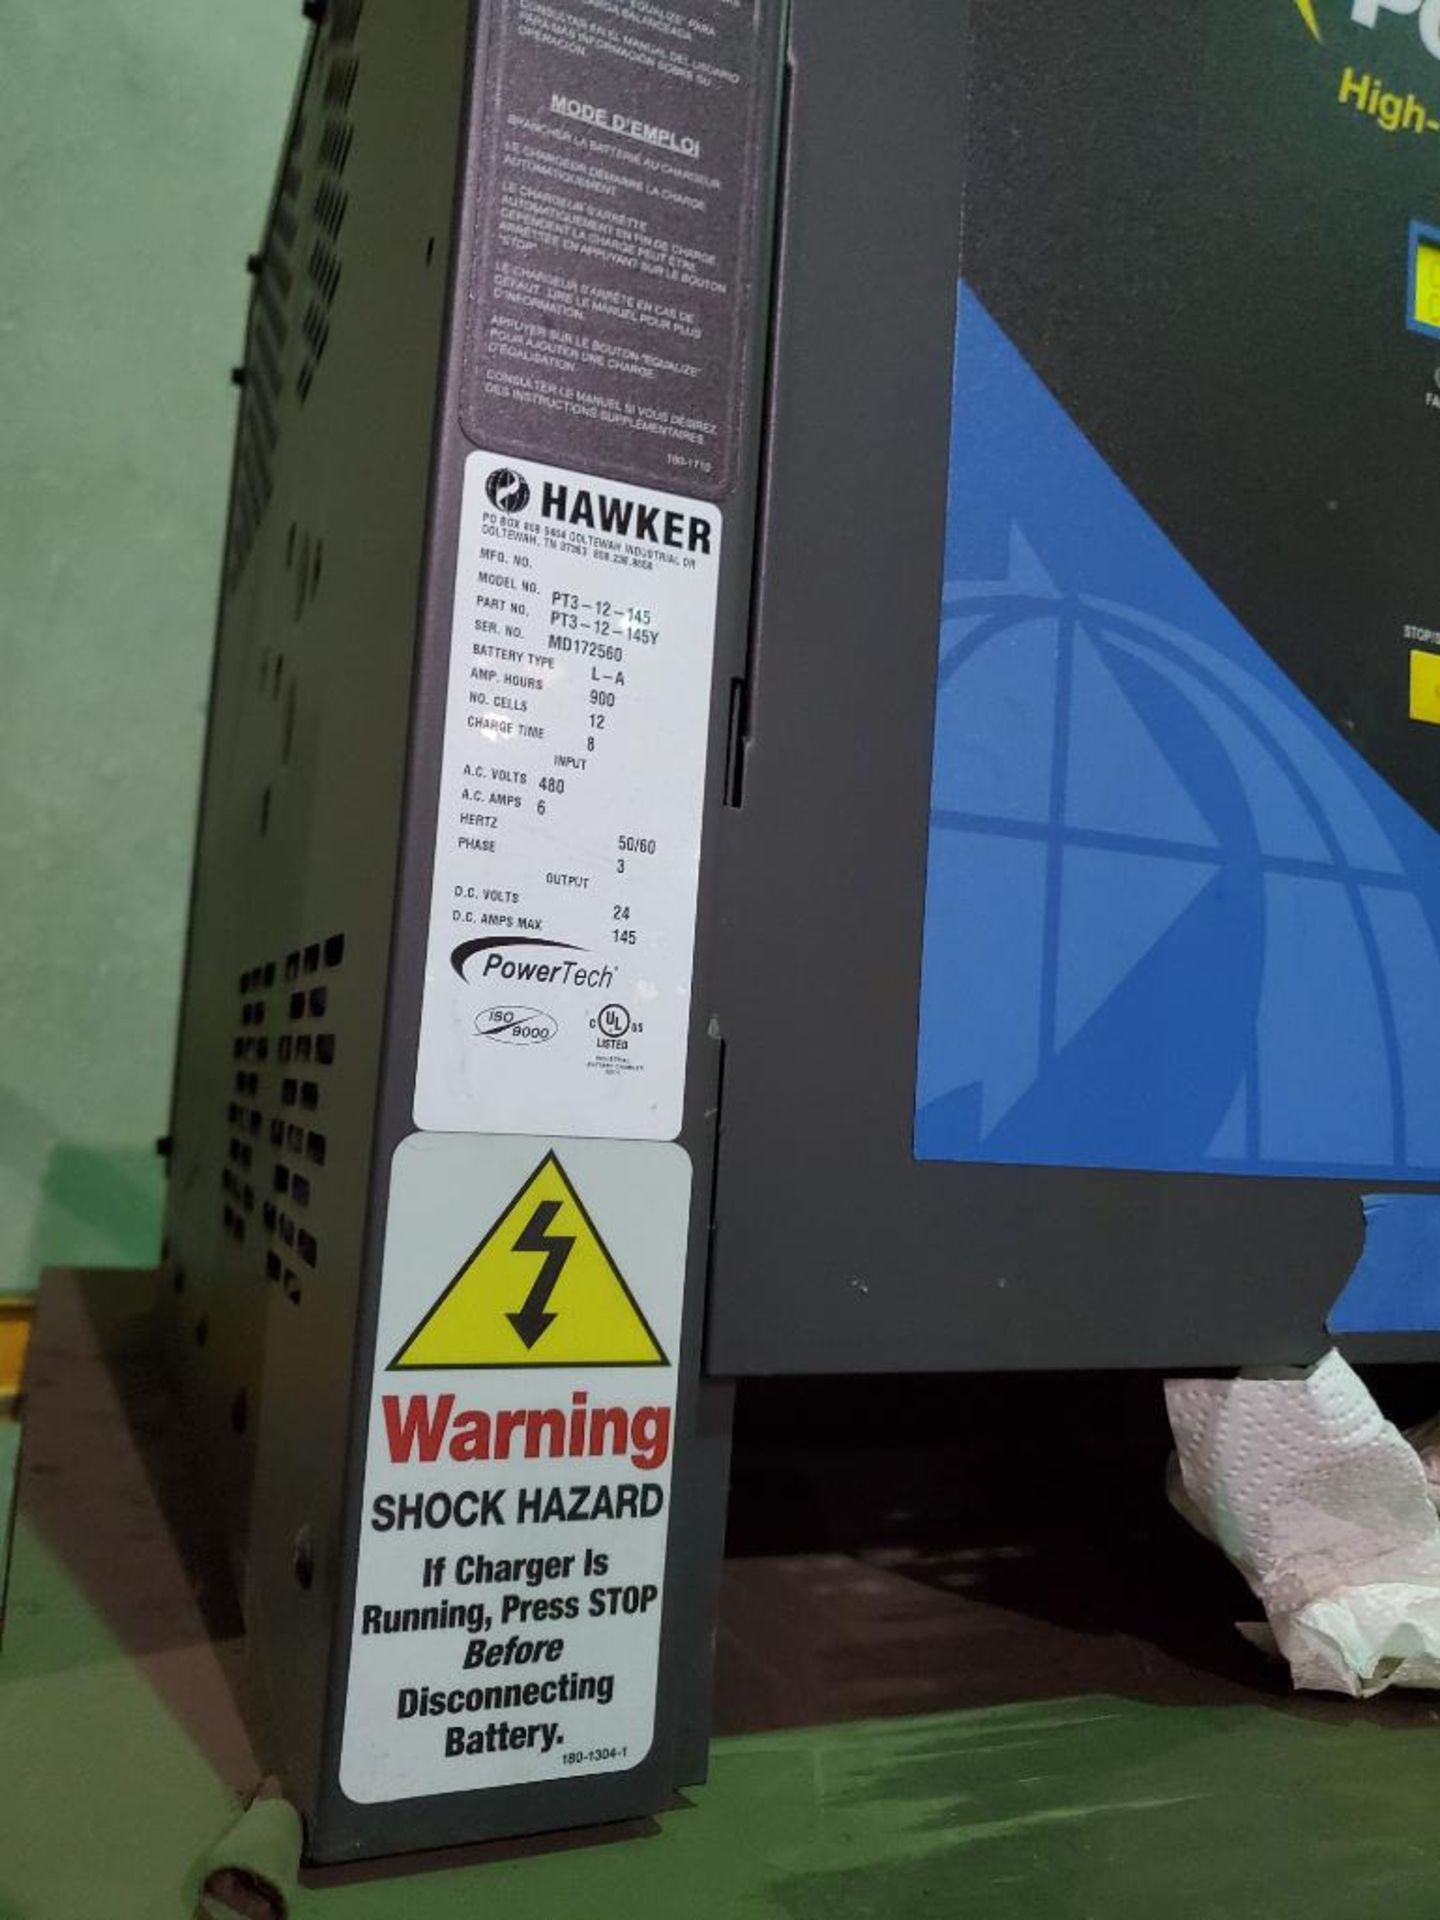 Hawker Powertech 24V Forklift Battery Charger, Model PT3-12-145, 145 DC Max. Output - Image 3 of 3